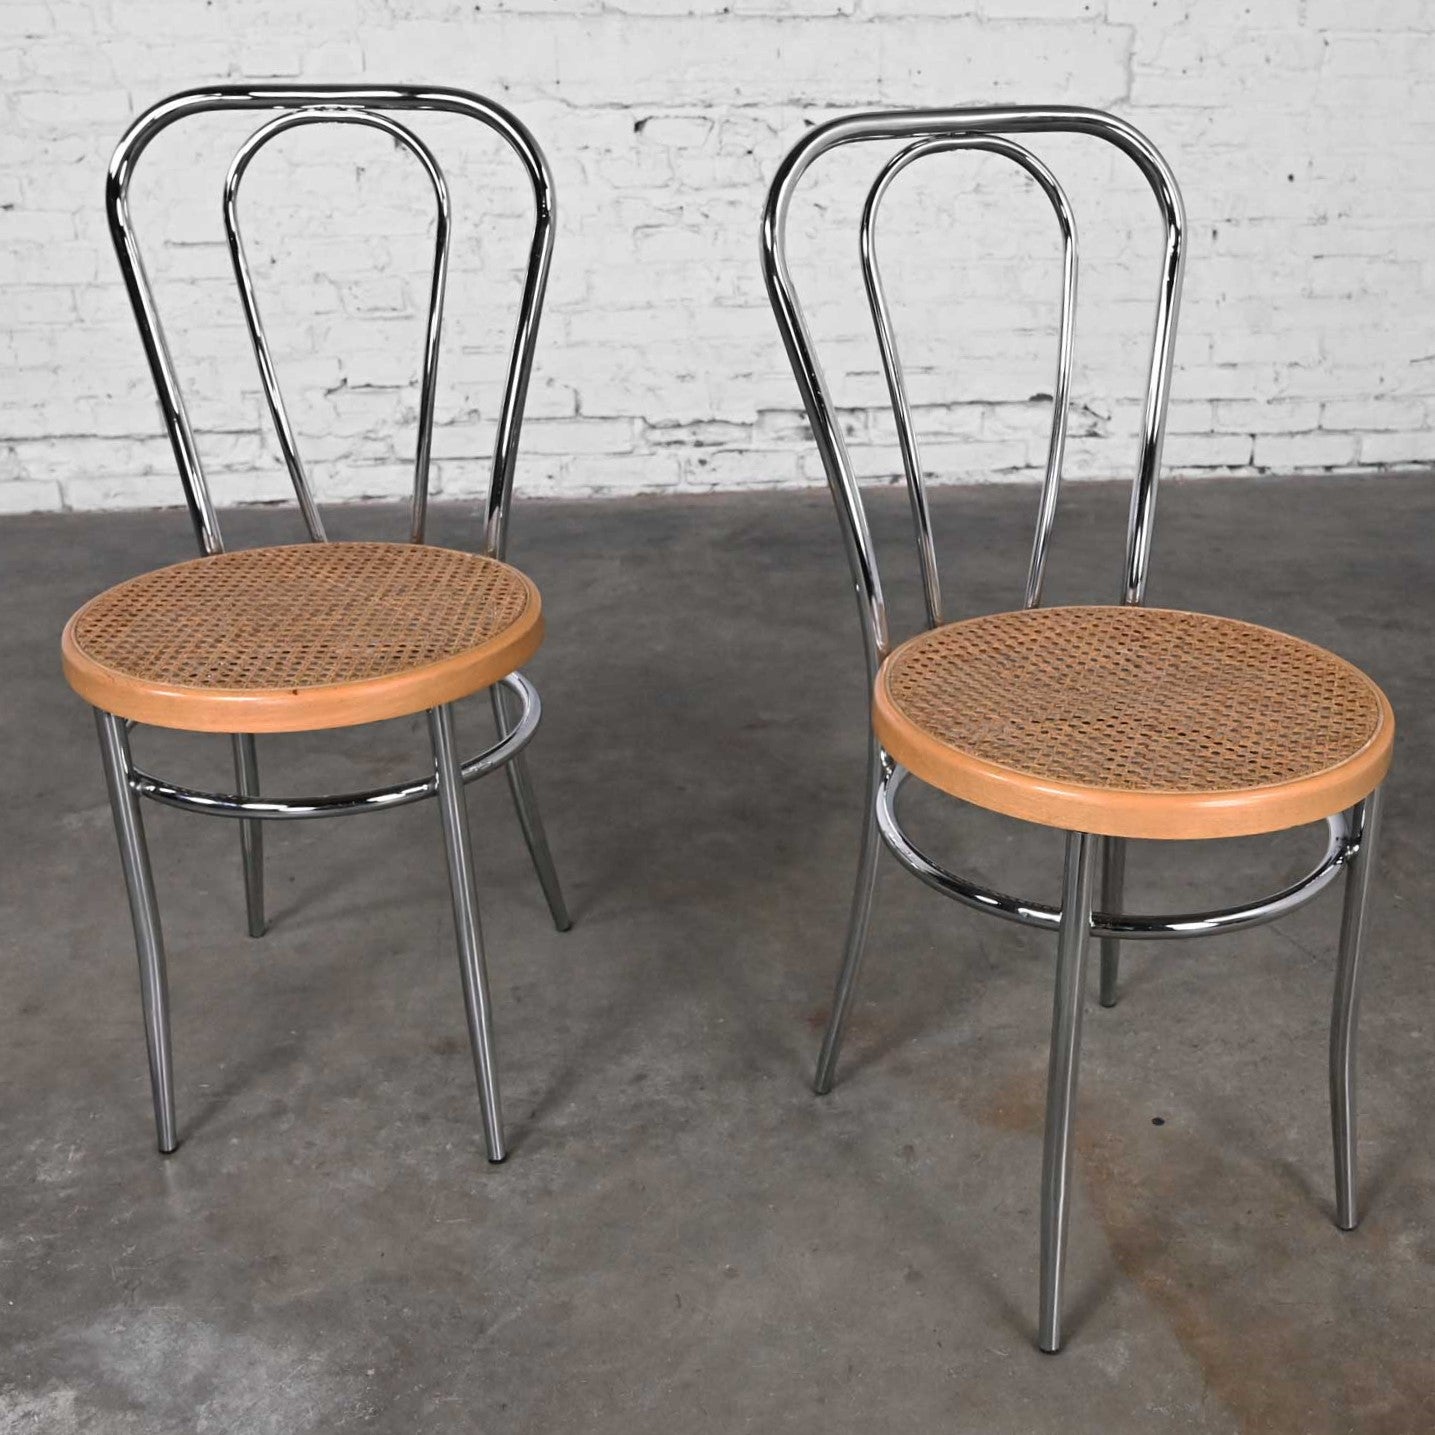 Lovely vintage Bauhaus style made in Italy after Thonet chrome frame with wood & cane seat bistro or café chairs, a pair. Beautiful condition, keeping in mind that these are vintage and not new so will have signs of use and wear. The wood ring on